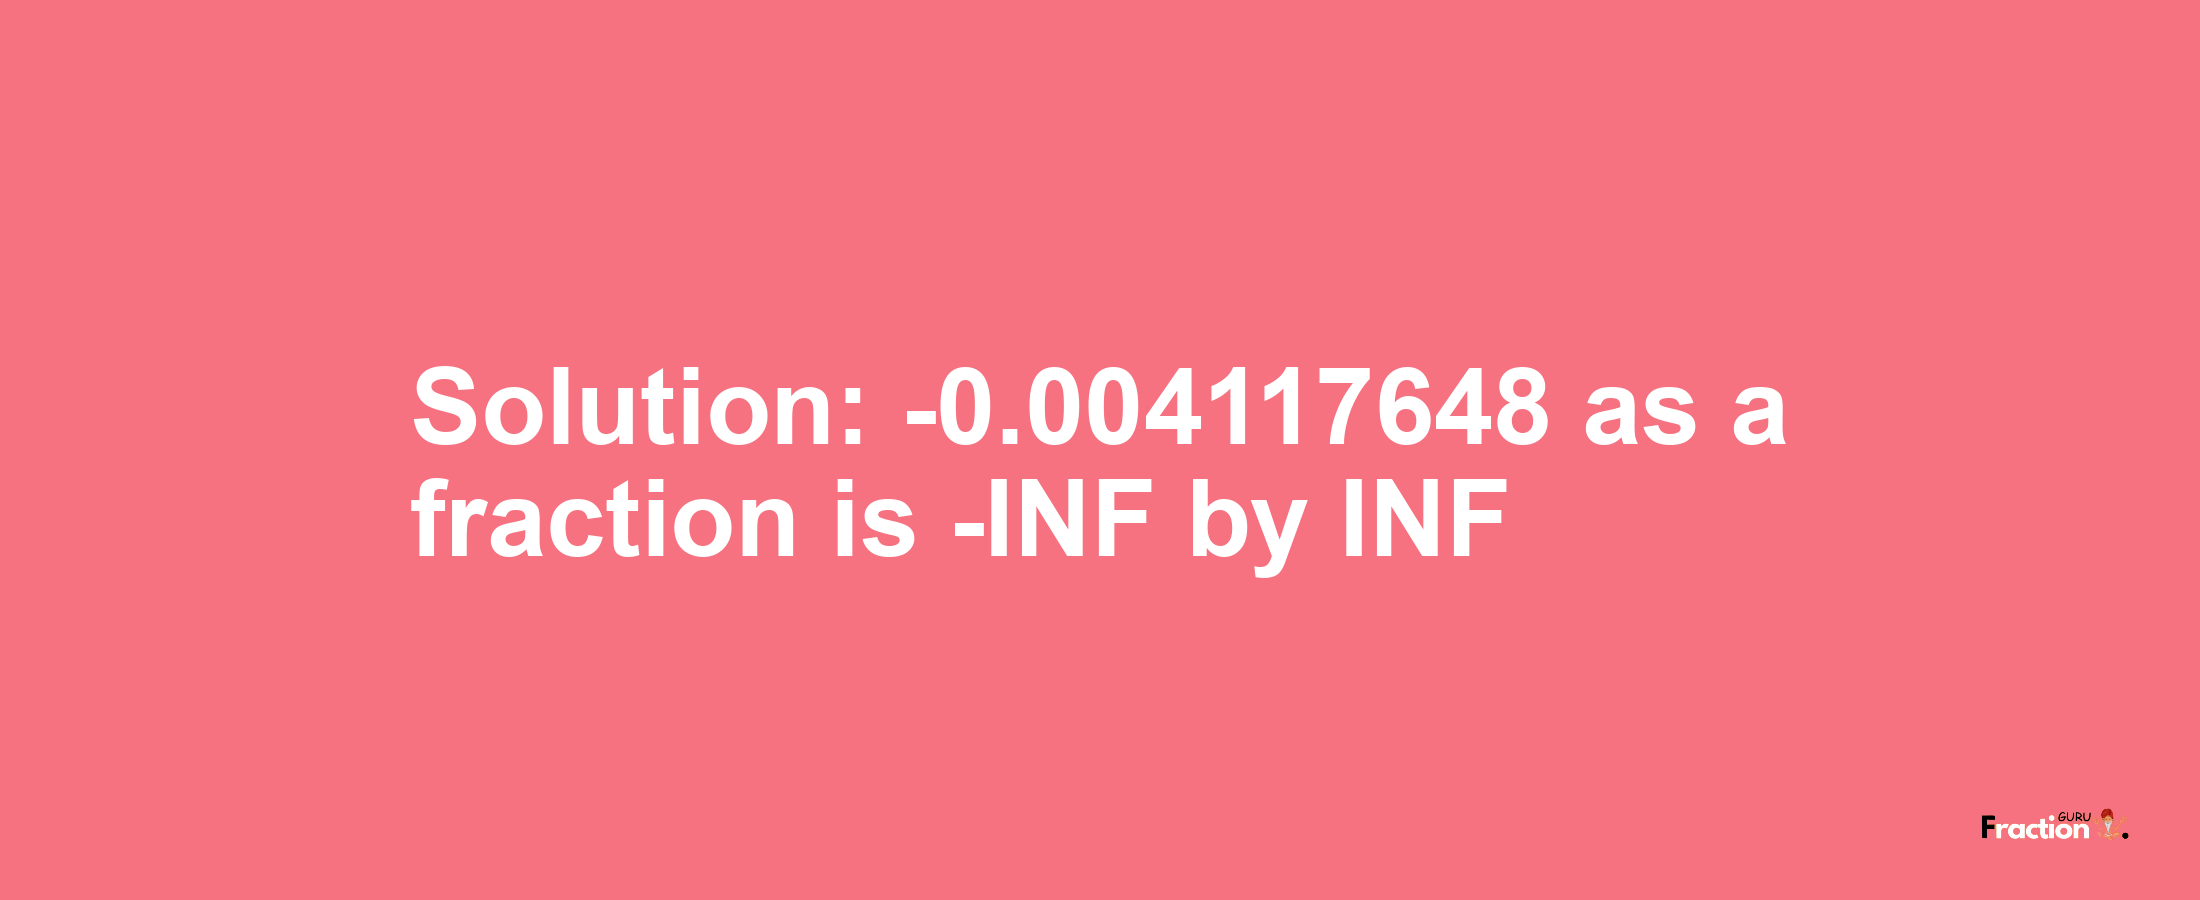 Solution:-0.004117648 as a fraction is -INF/INF